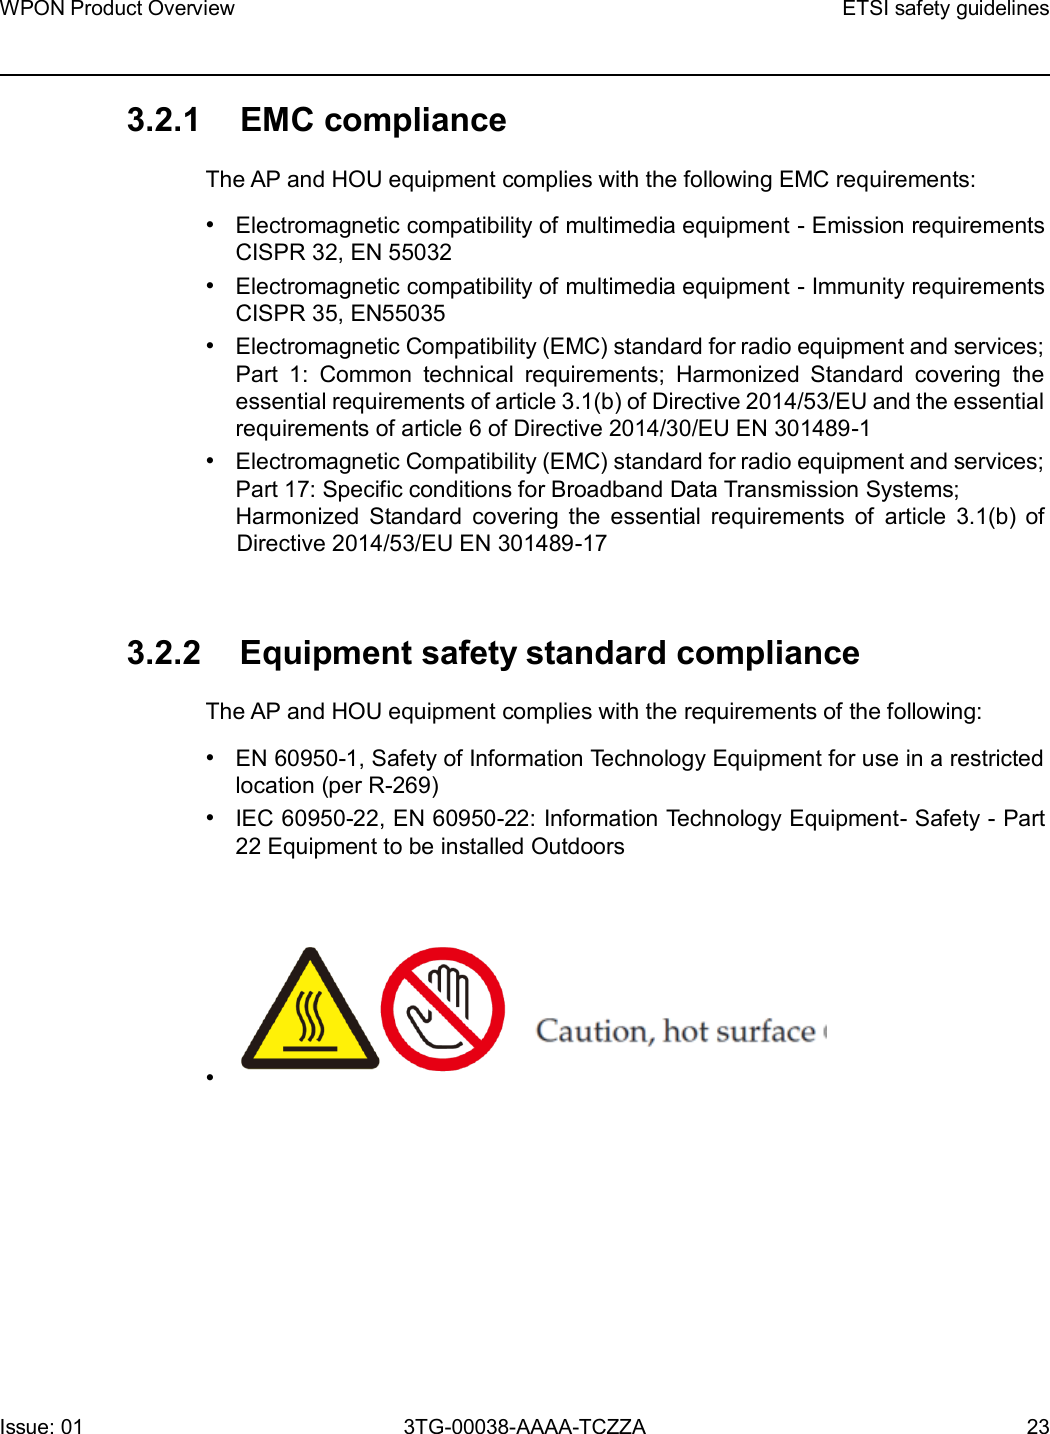 Page 23 of Nokia Bell 7577WPONAPAC WPON User Manual WPON Product Overview